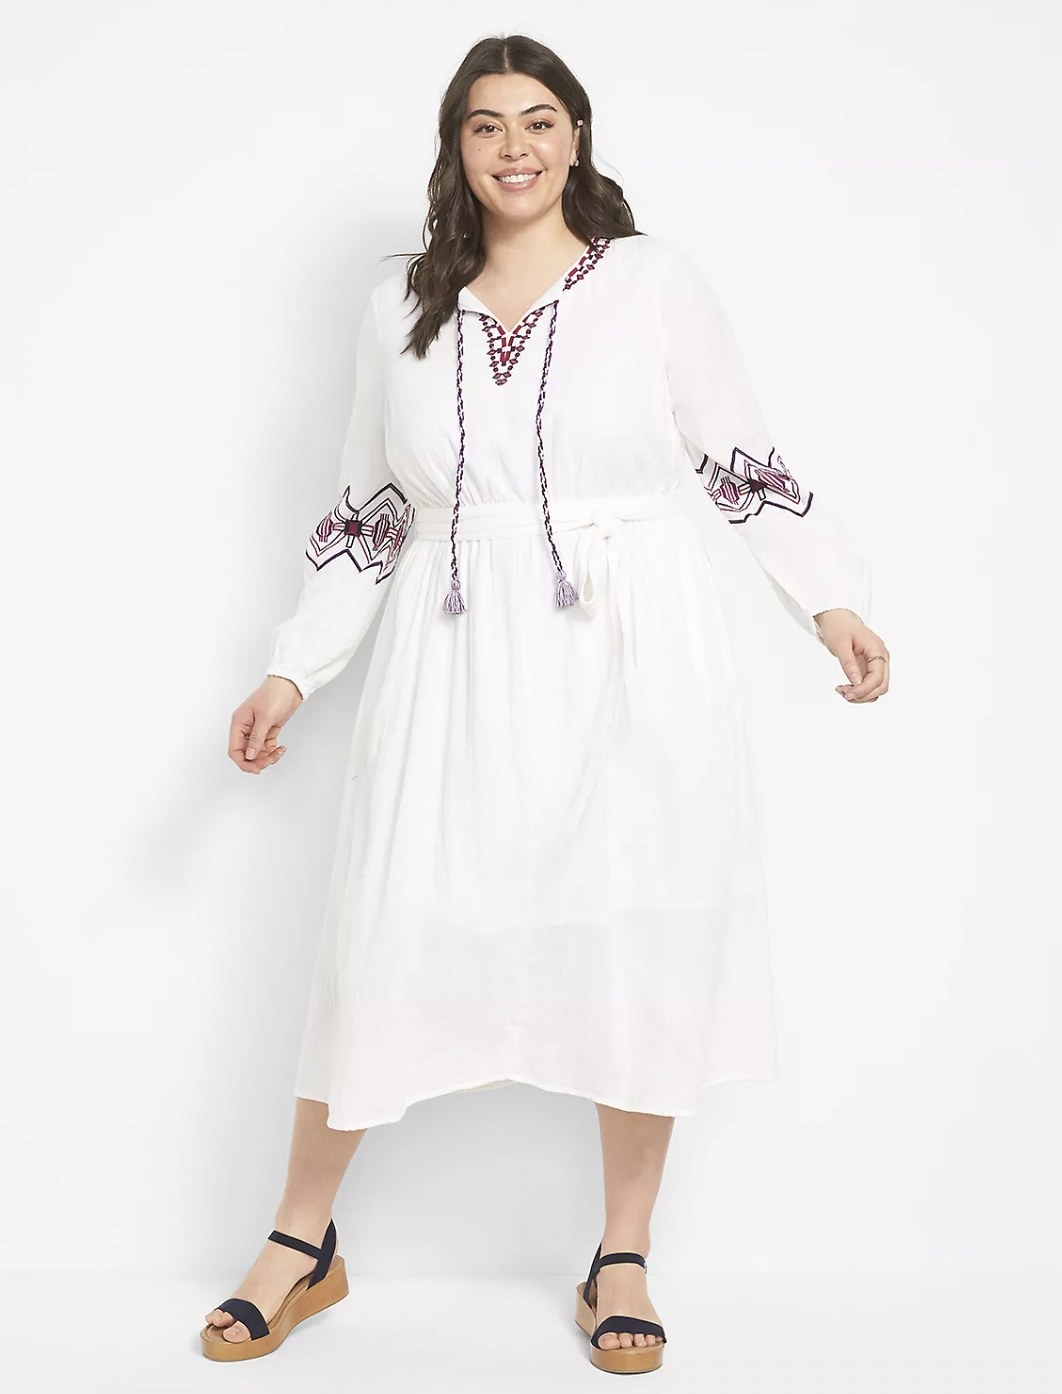 Model in the white long-sleeve dress featuring long tie front tassels